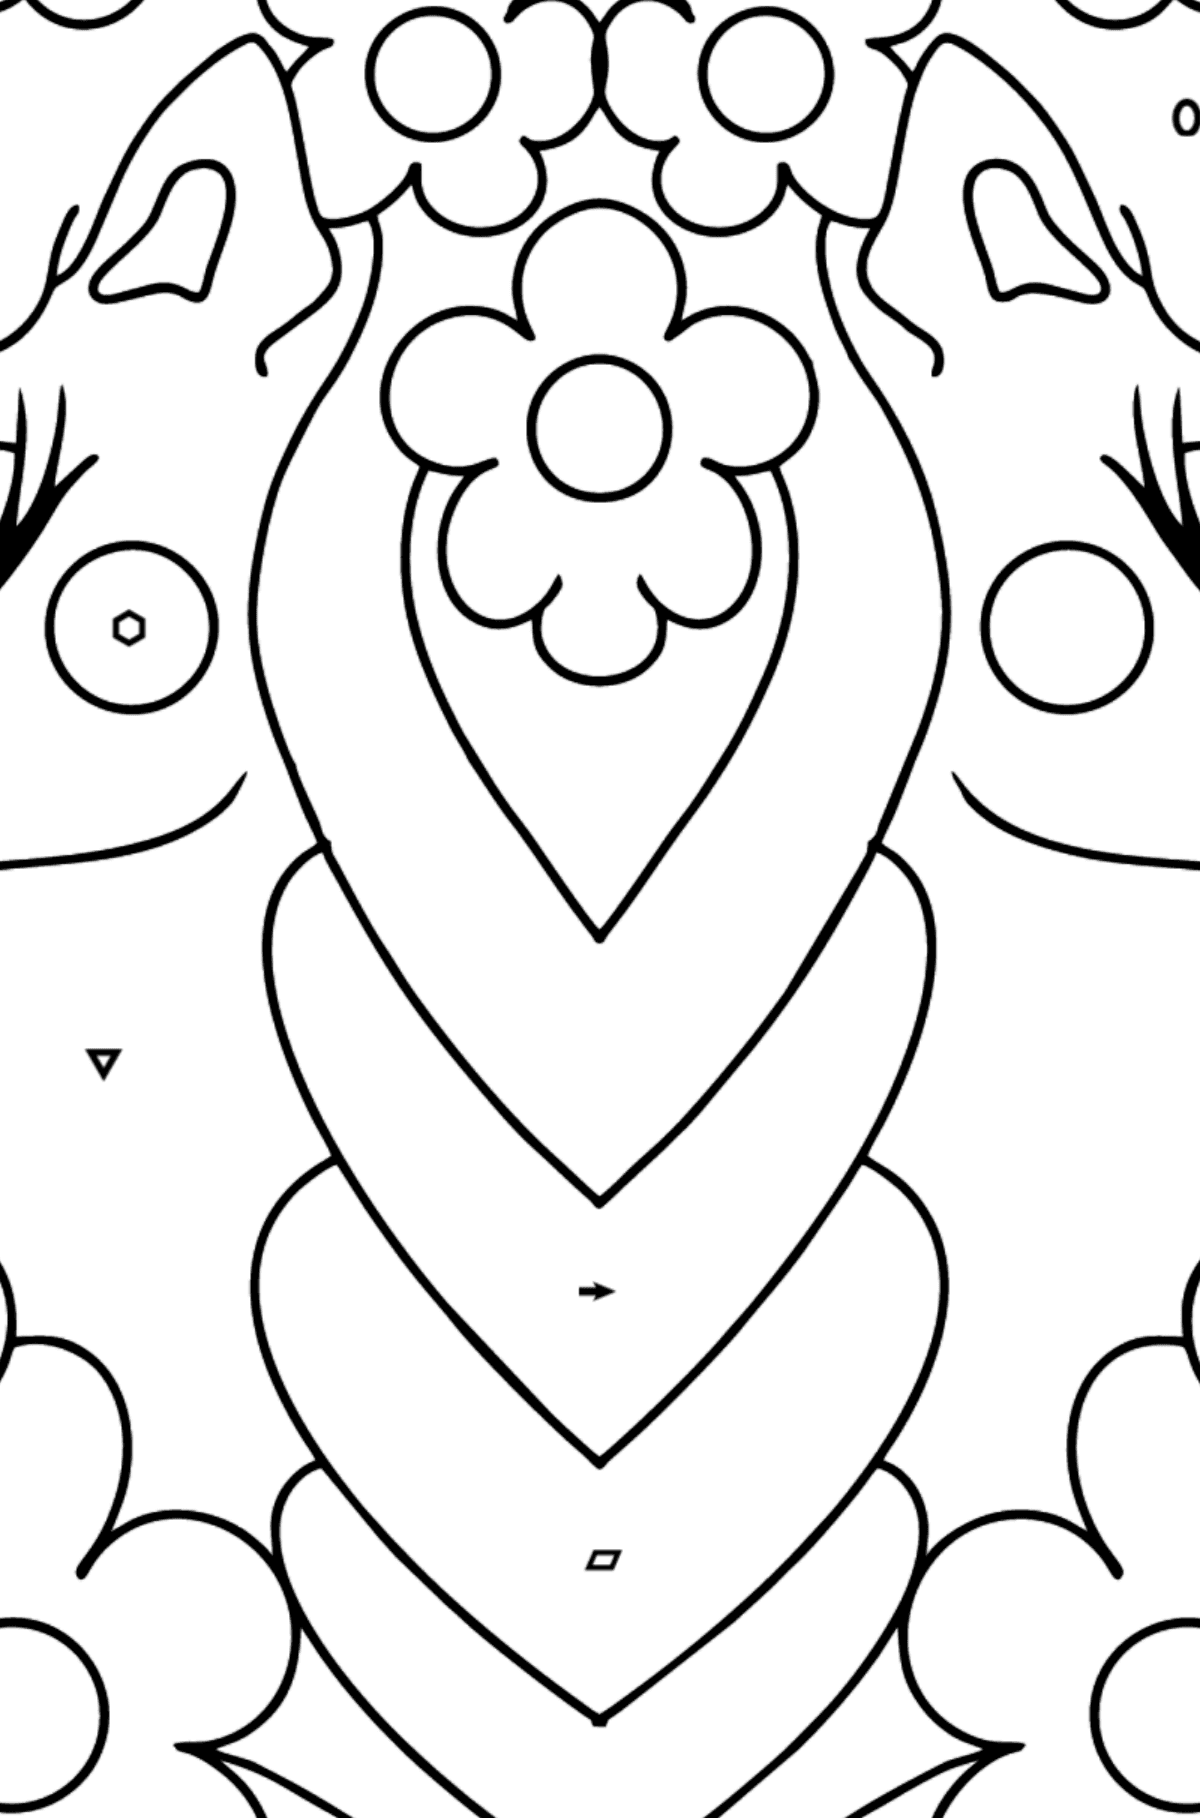 Simple Coloring Book Adorable Unicorn - Coloring by Symbols and Geometric Shapes for Kids